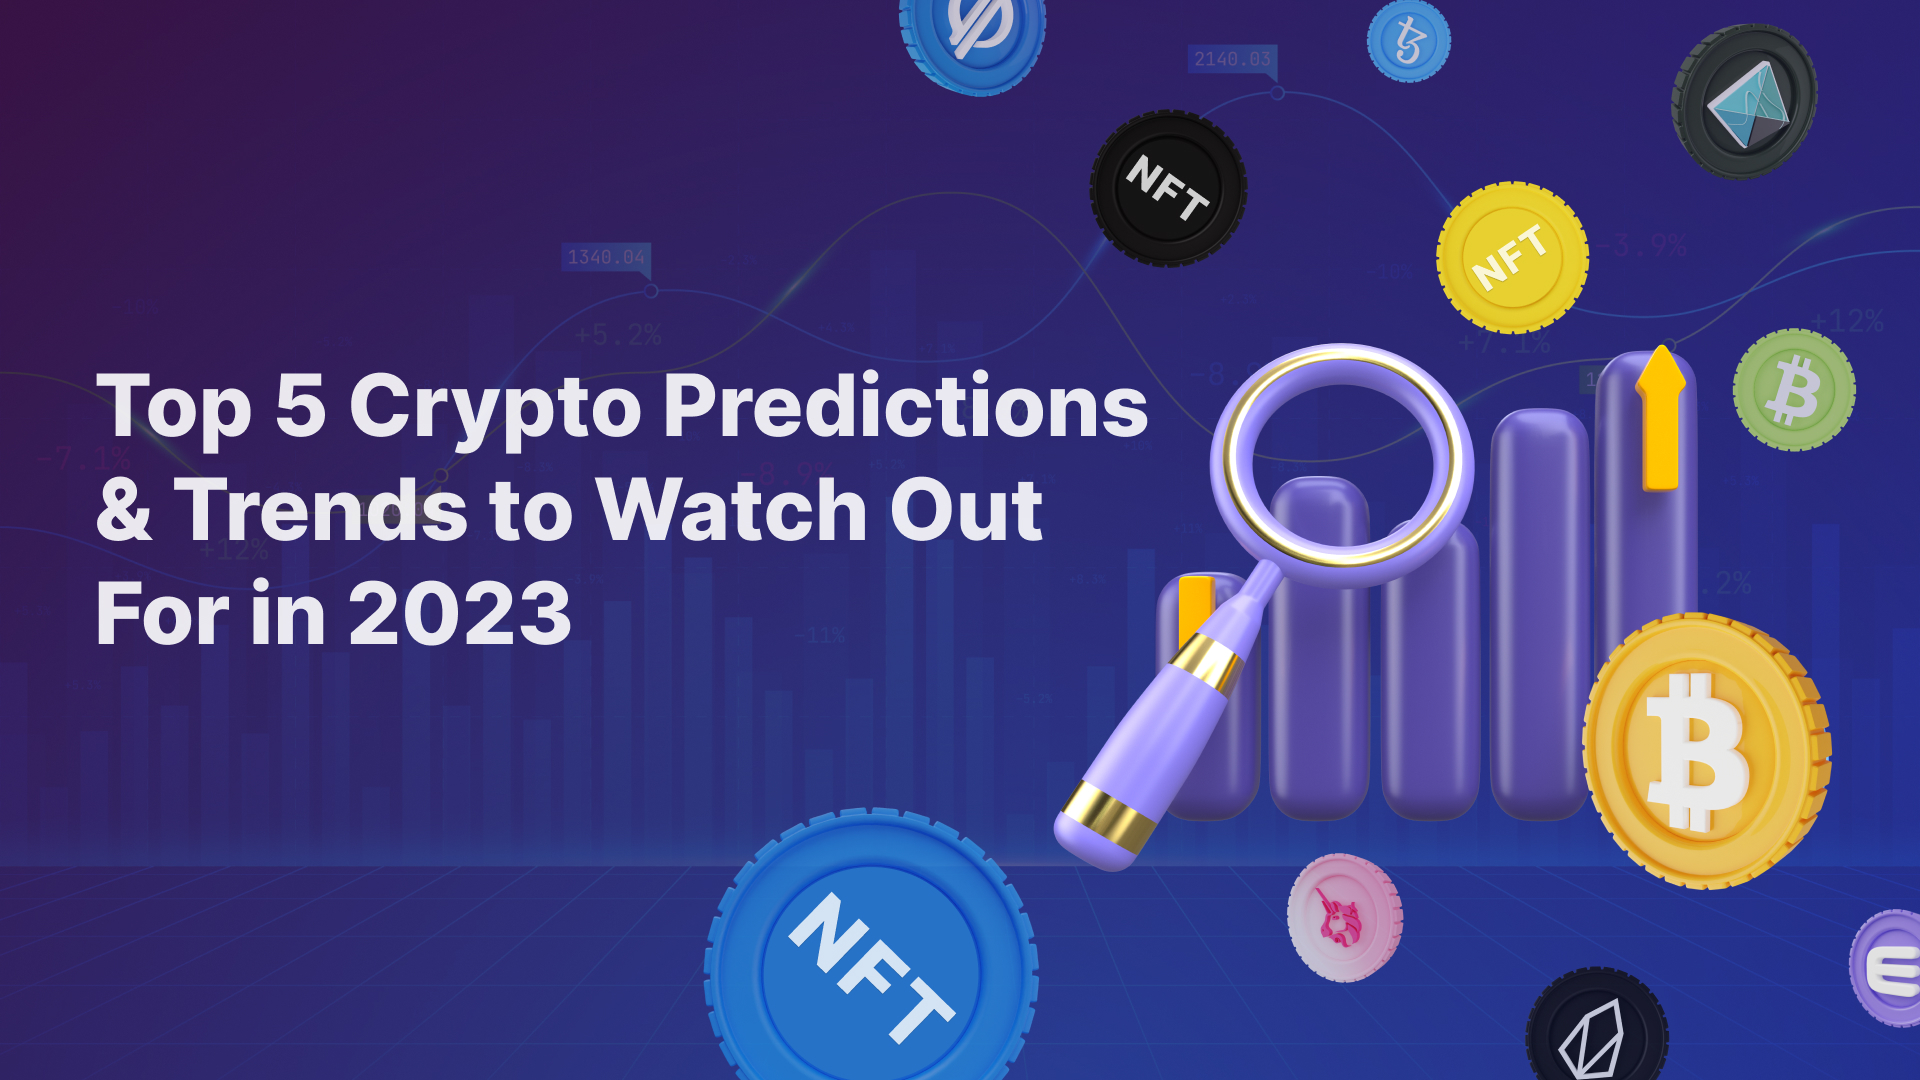 Top 5 Crypto Predictions & Trends to Watch Out For in 2023